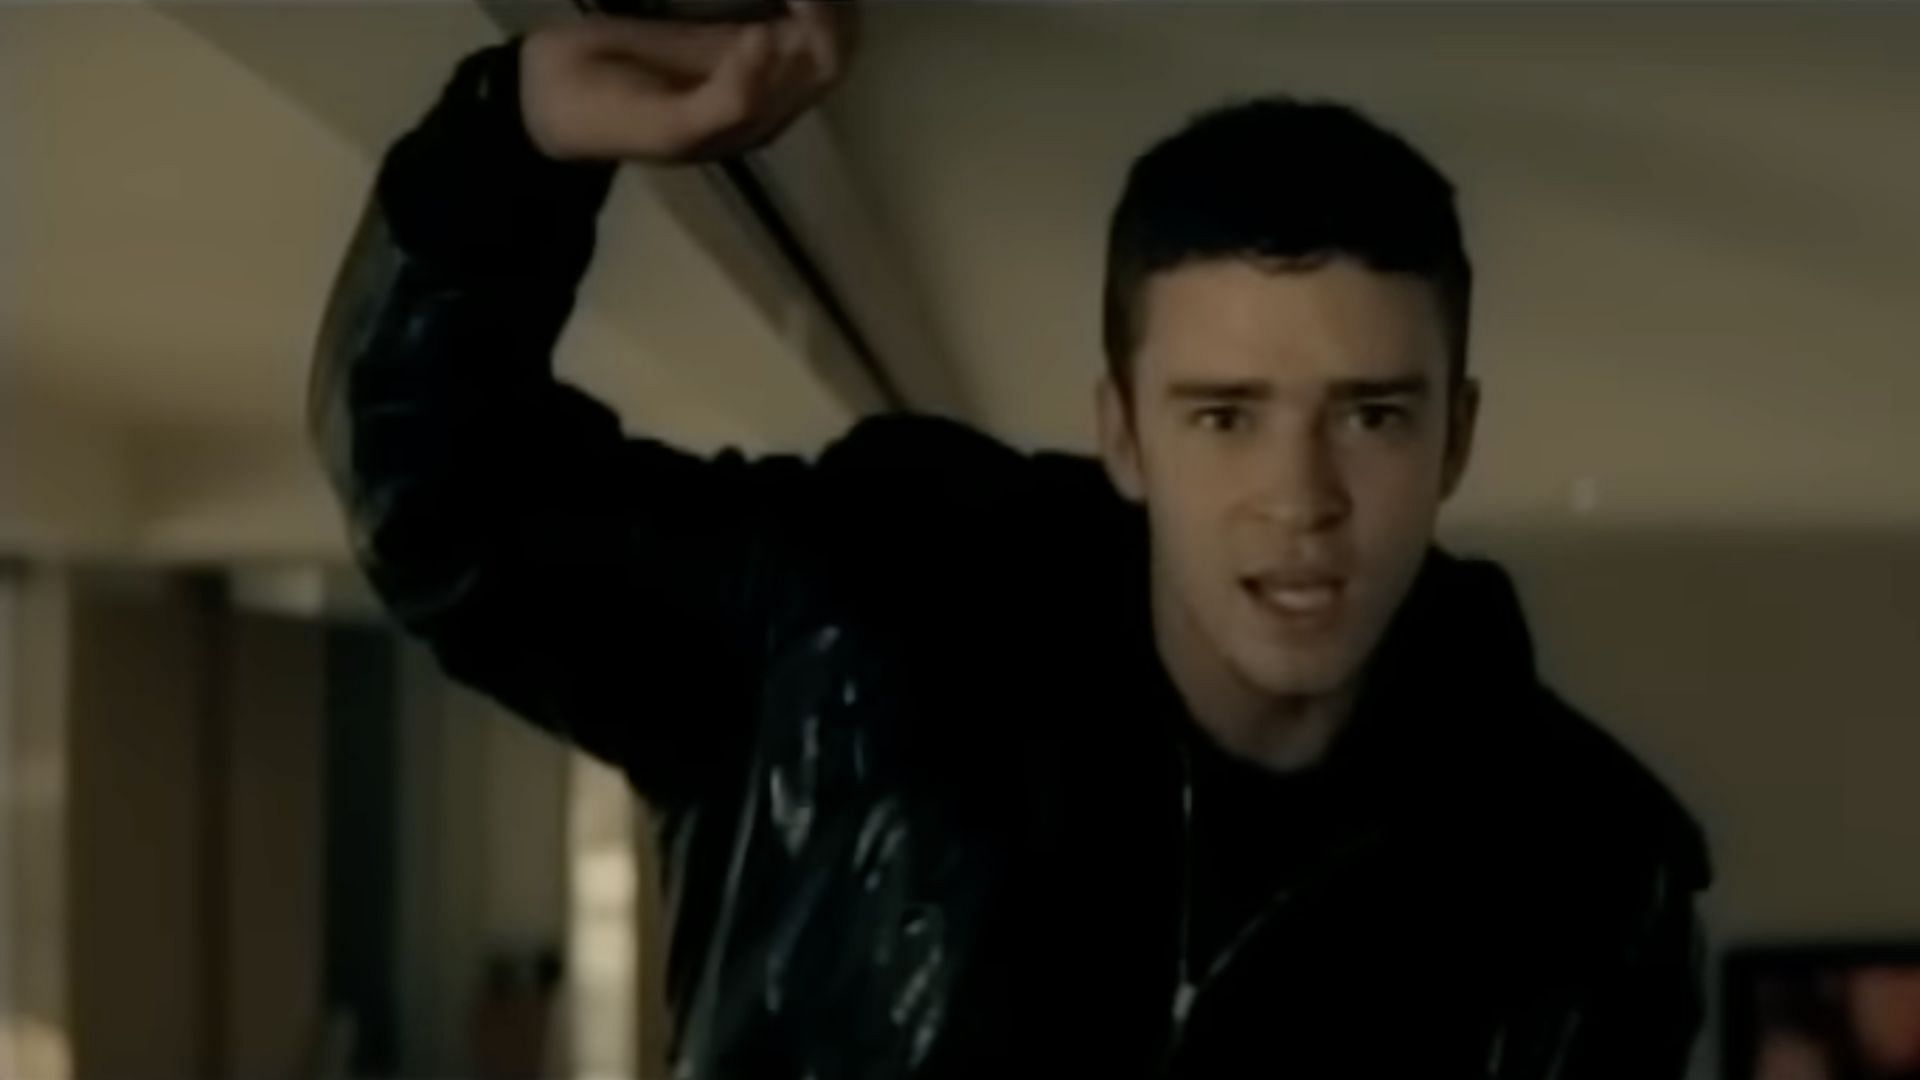 Justin Timberlake in the music video for &#039;Cry Me A River&#039; uploaded to YouTube on October 03, 2009 (Image via YouTube/@JustinTimberlake)